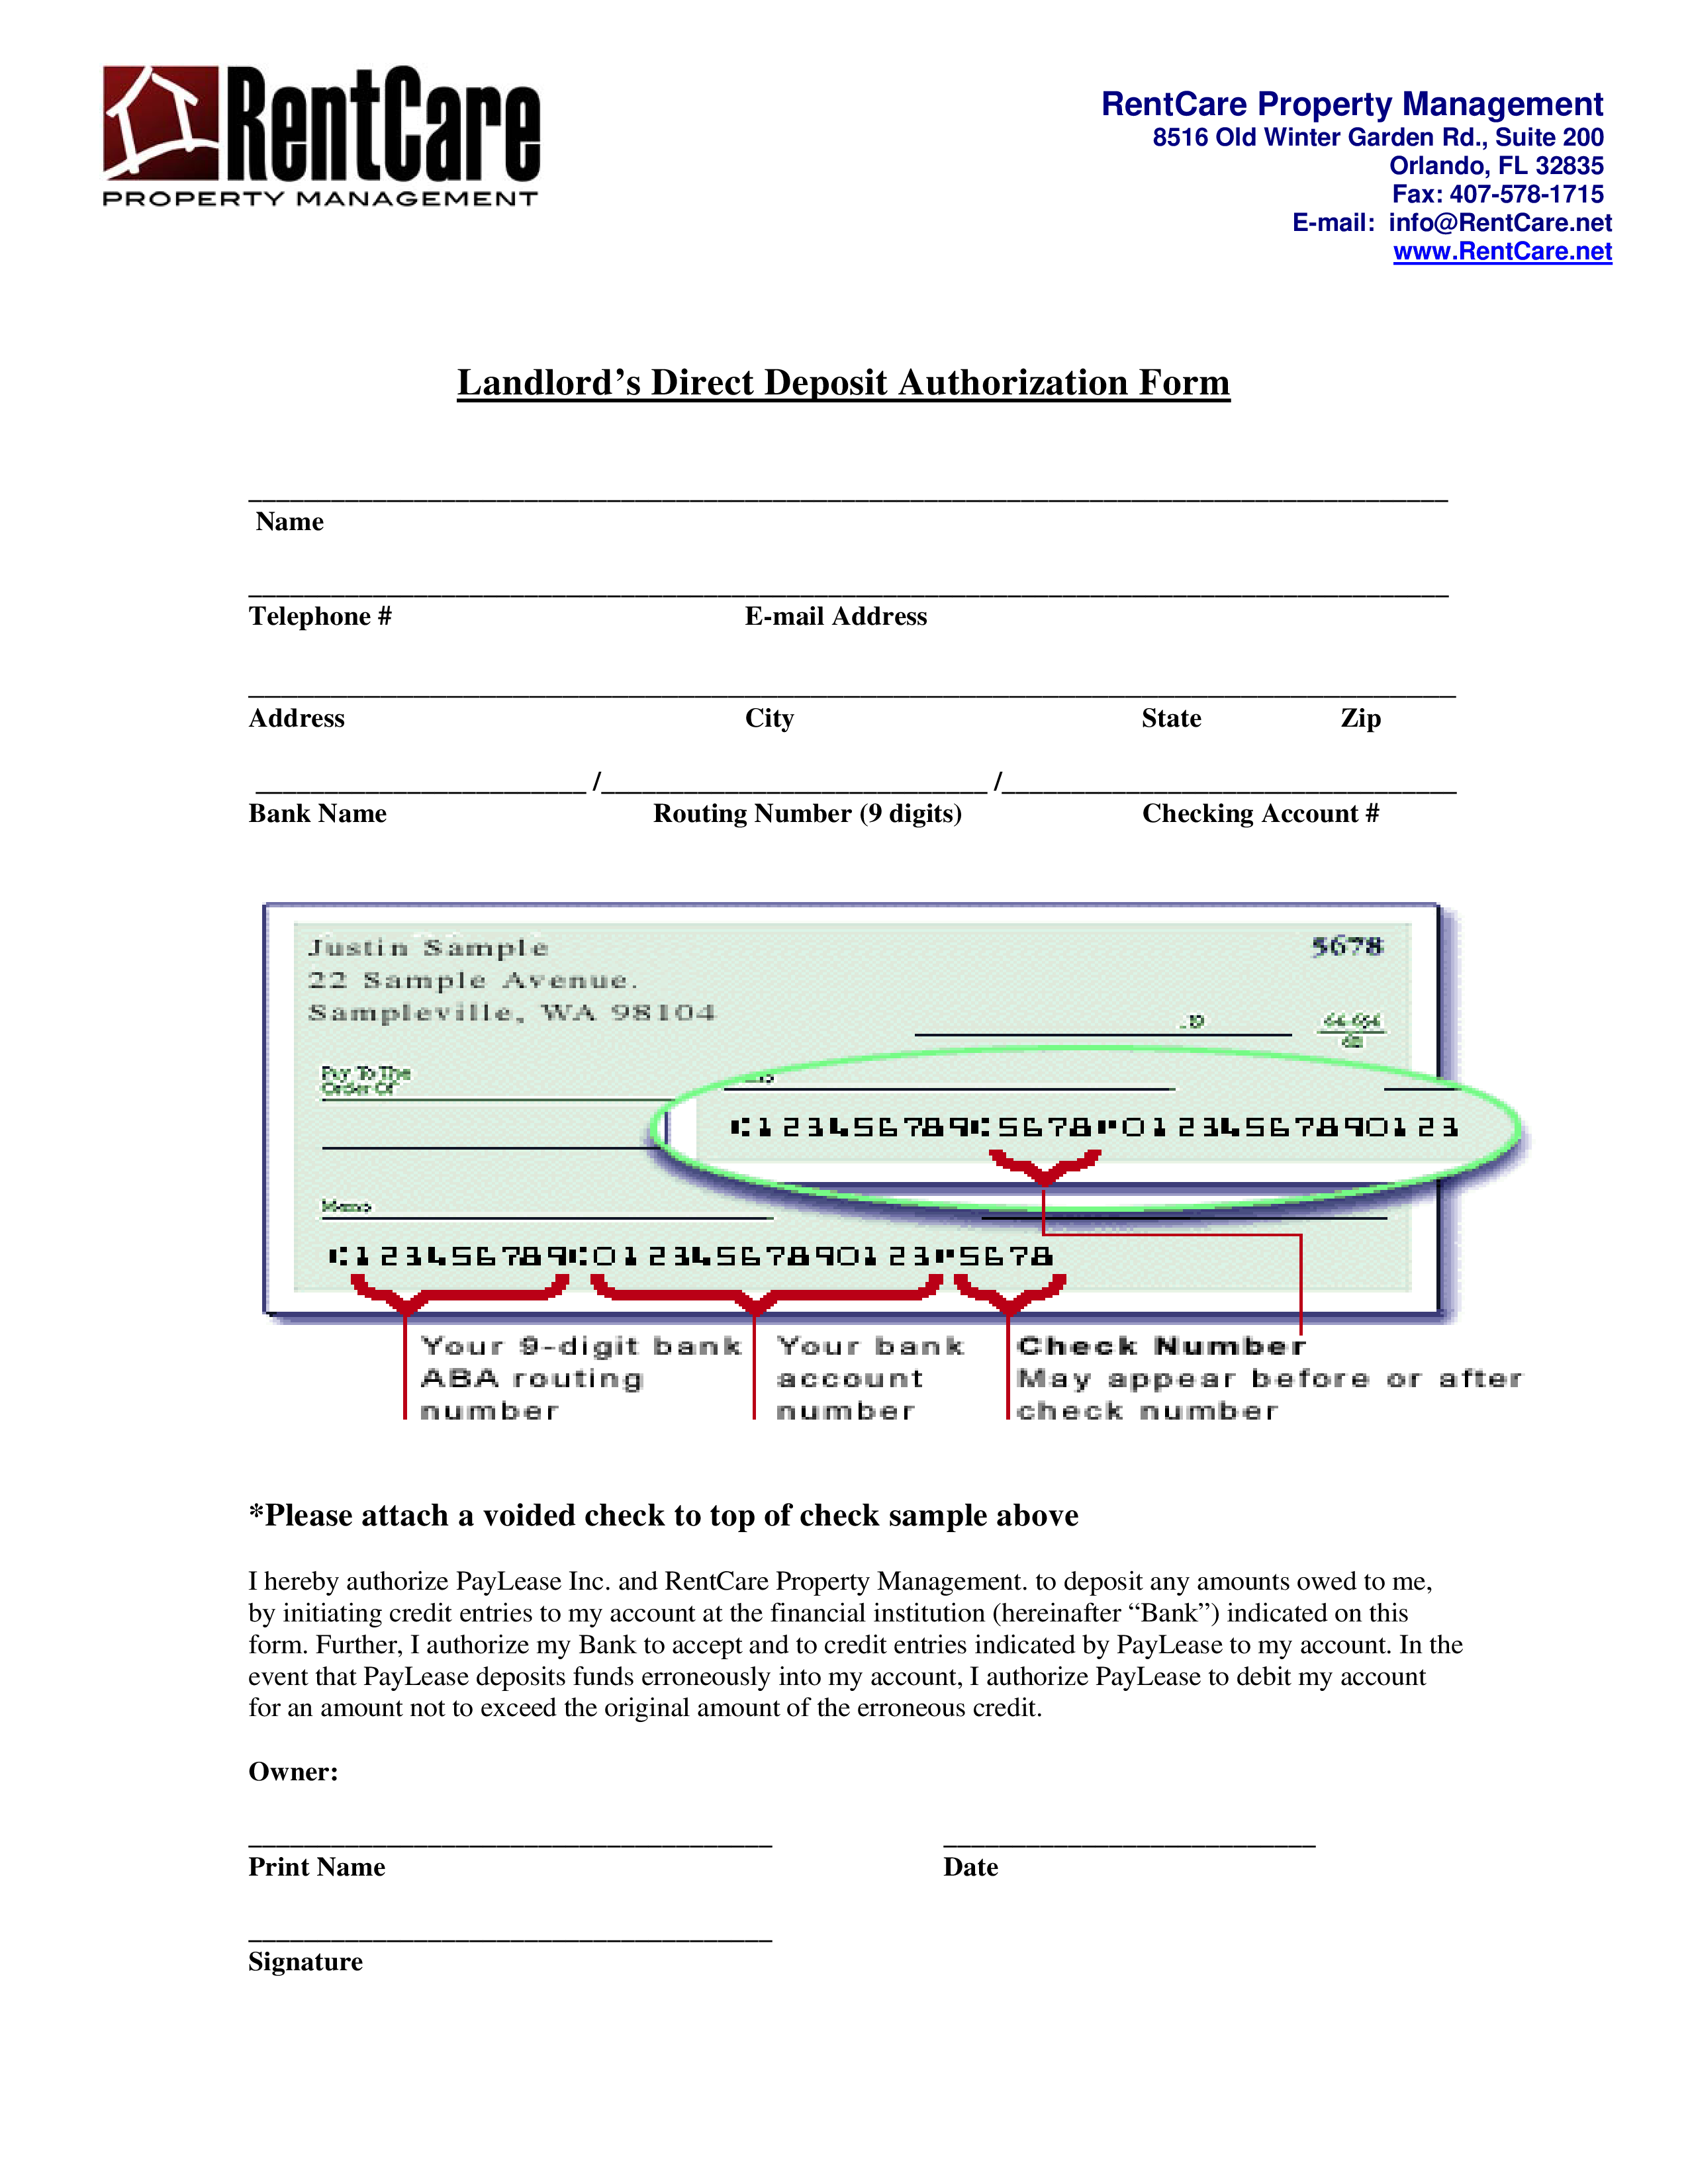 Landlord Direct Deposit Form  Templates at allbusinesstemplates.com Within direct debit agreement template